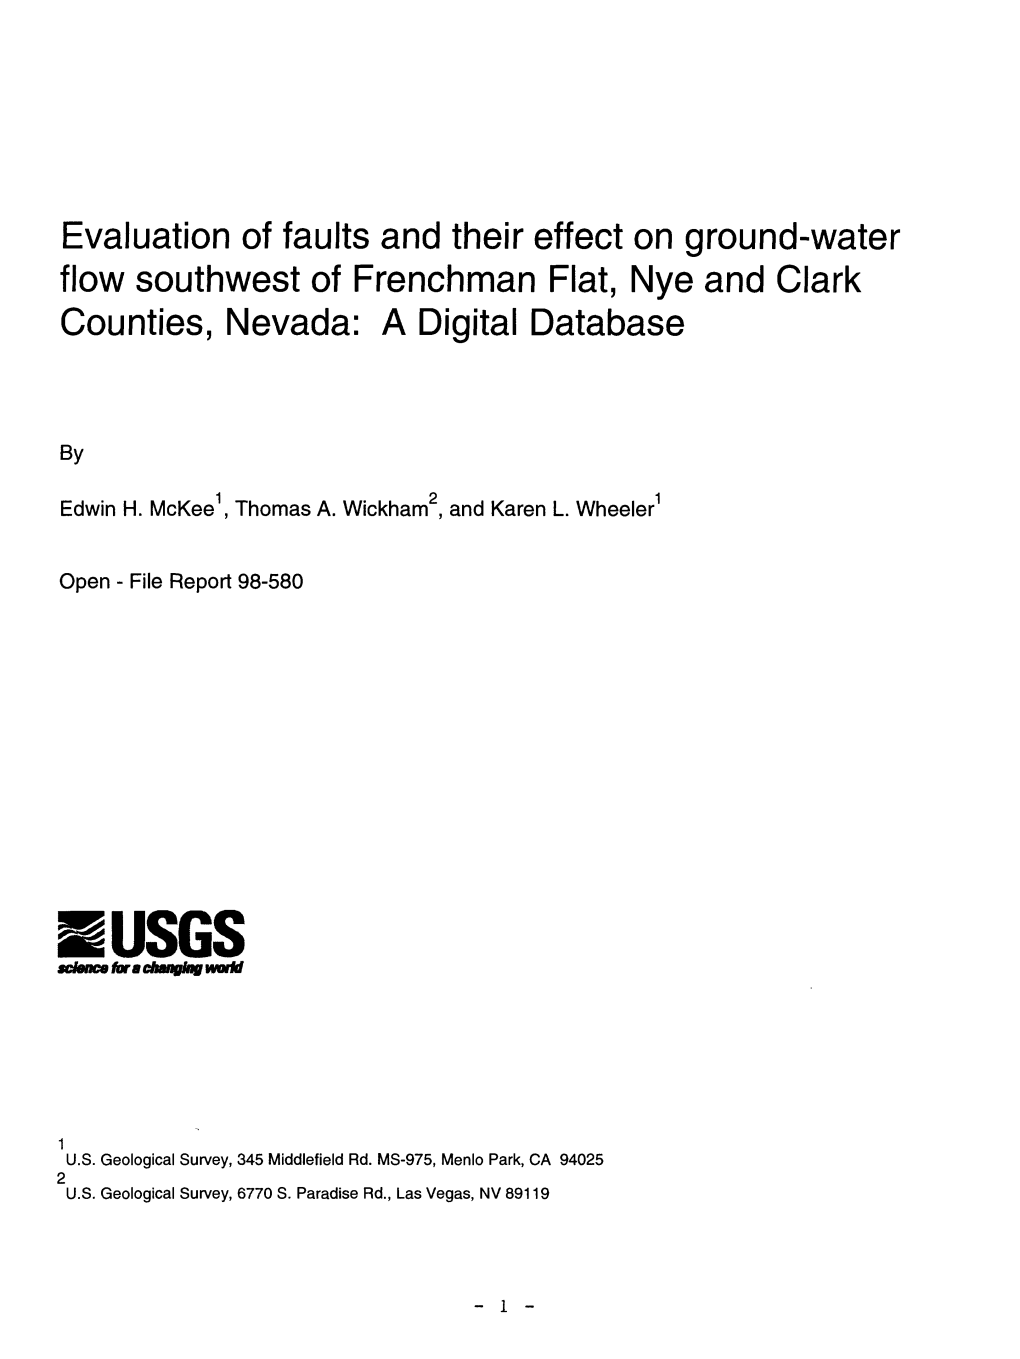 Evaluation of Faults and Their Effect on Ground-Water Flow Southwest of Frenchman Flat, Nye and Clark Counties, Nevada: a Digital Database